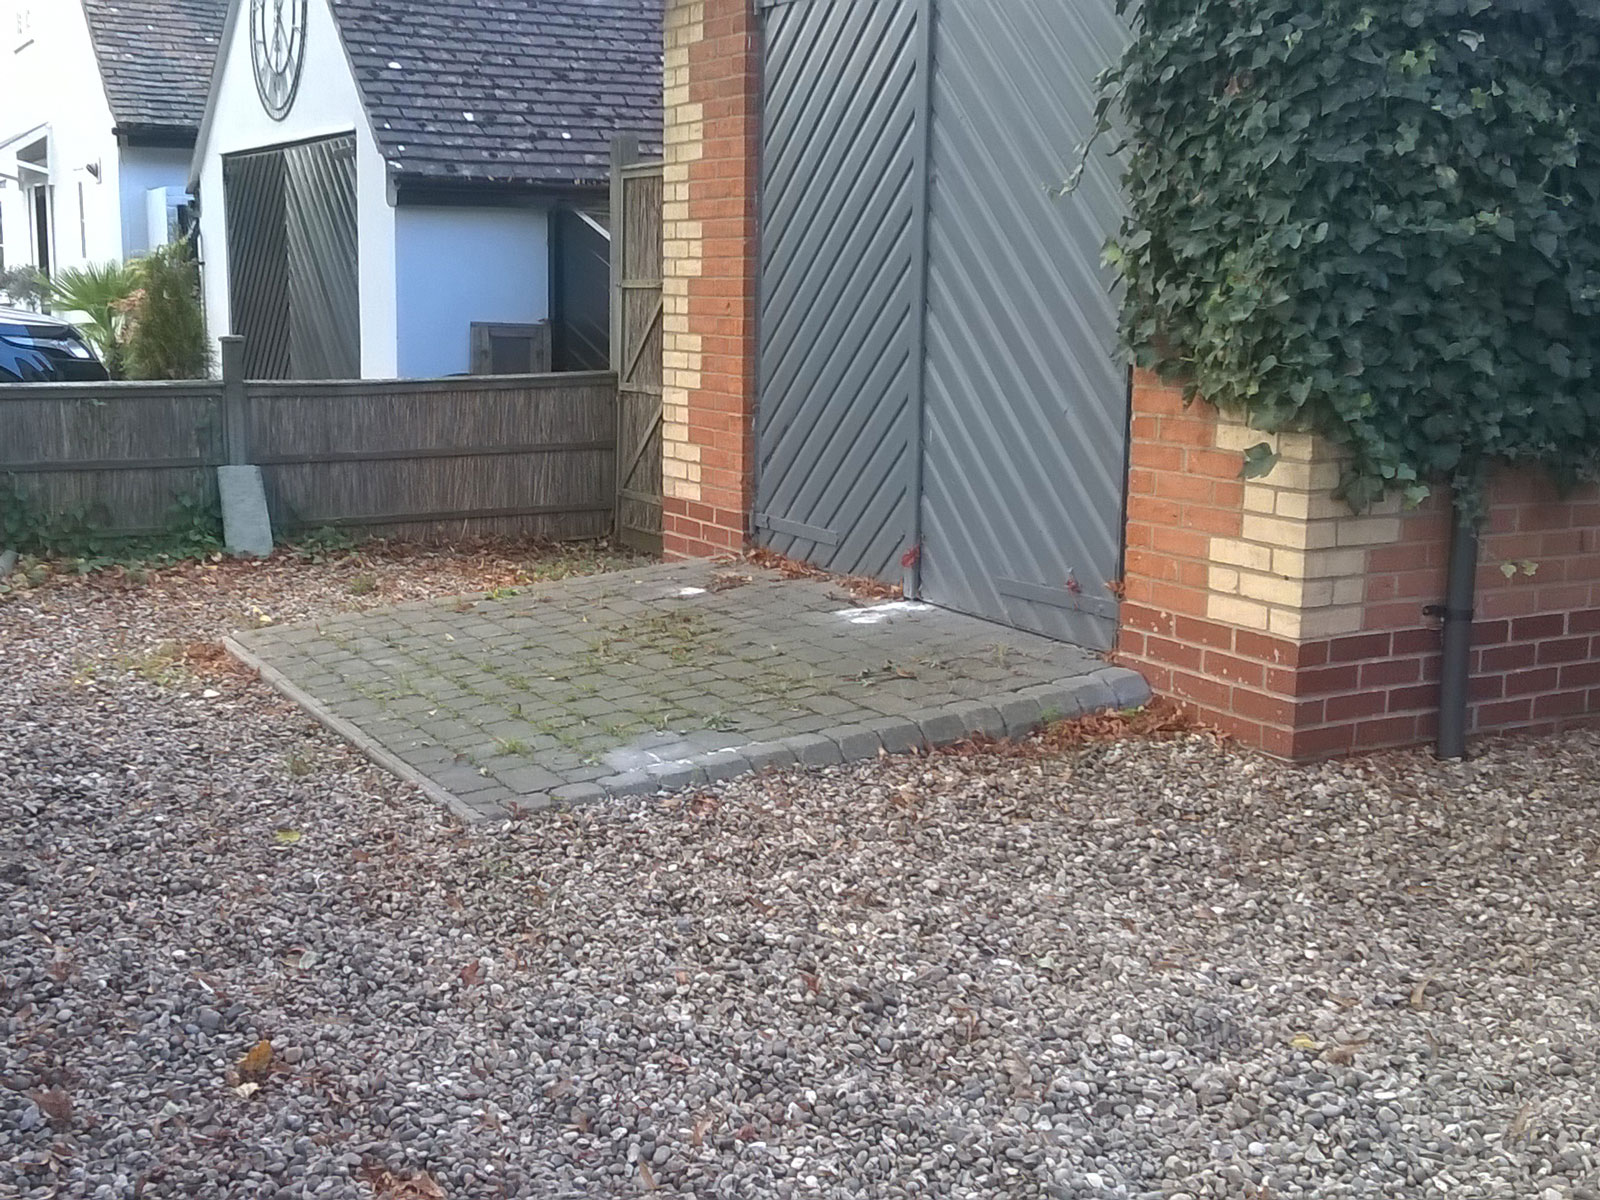 domestic garage doors in grey with paved ramp to entrance surrounded by grey gravel